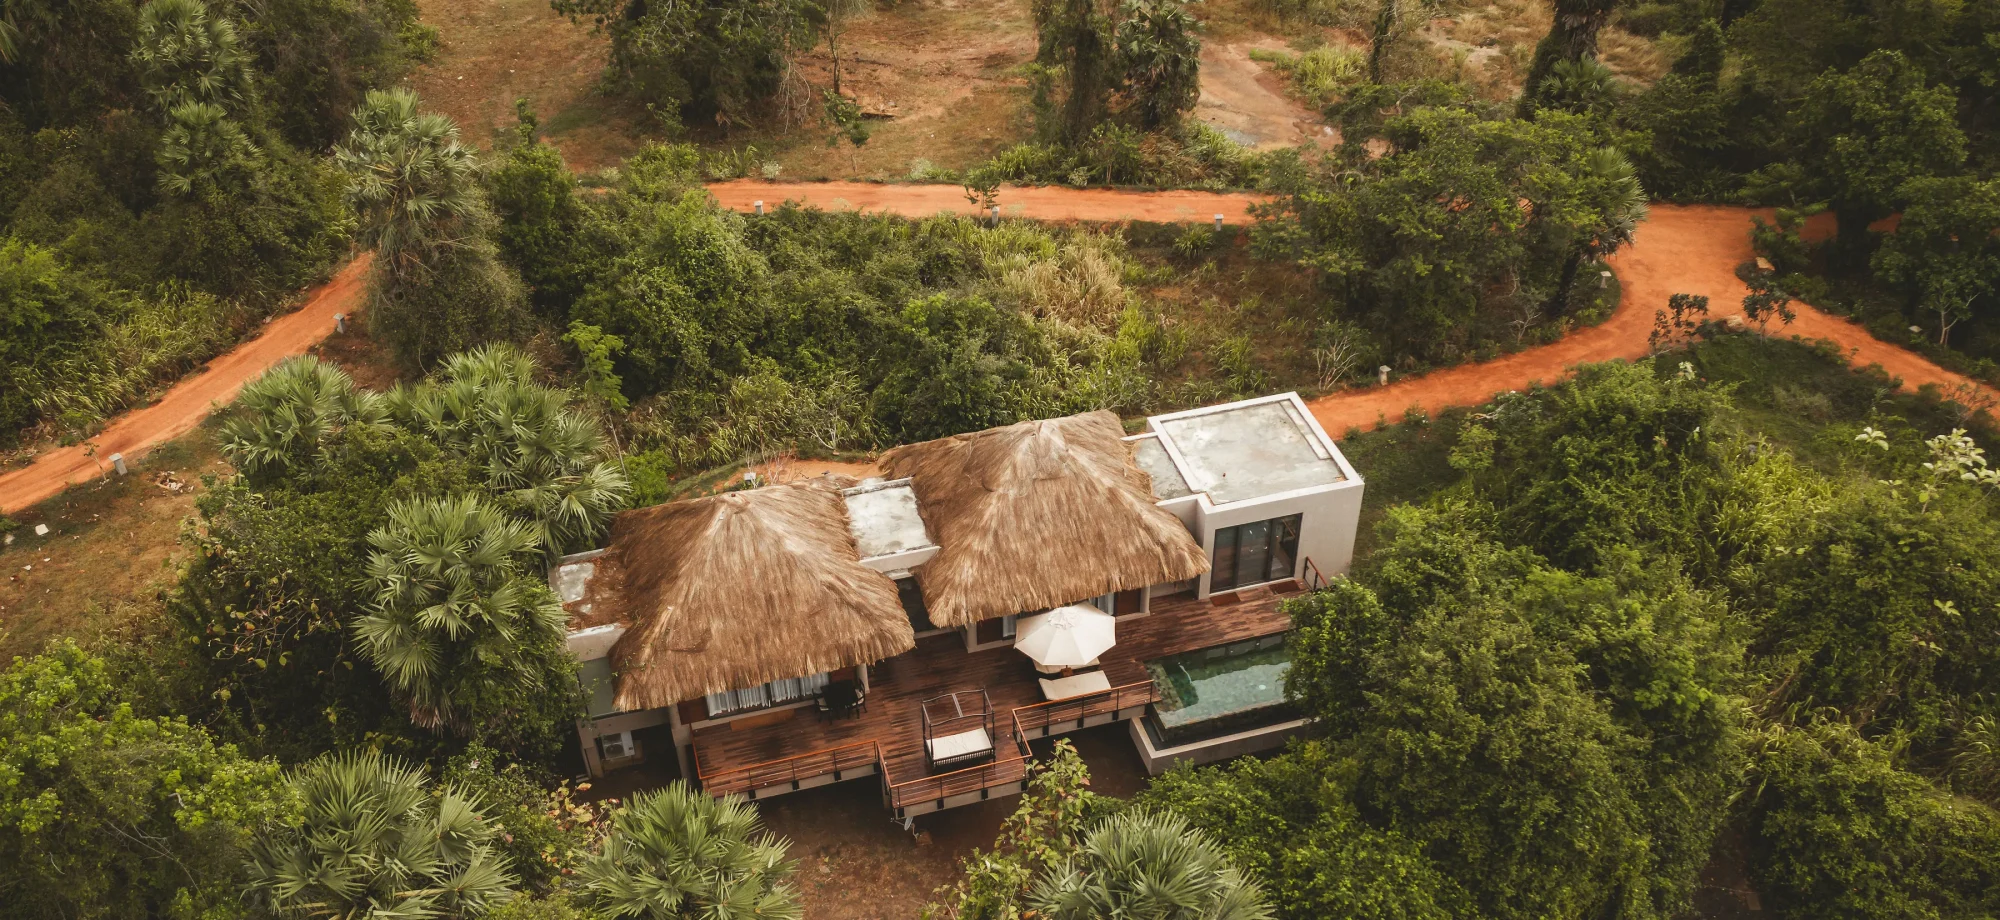 A drone view of one of the Deluxe Villas at Ulagalla, it is encased by verdant foliage and has thatched roofing.